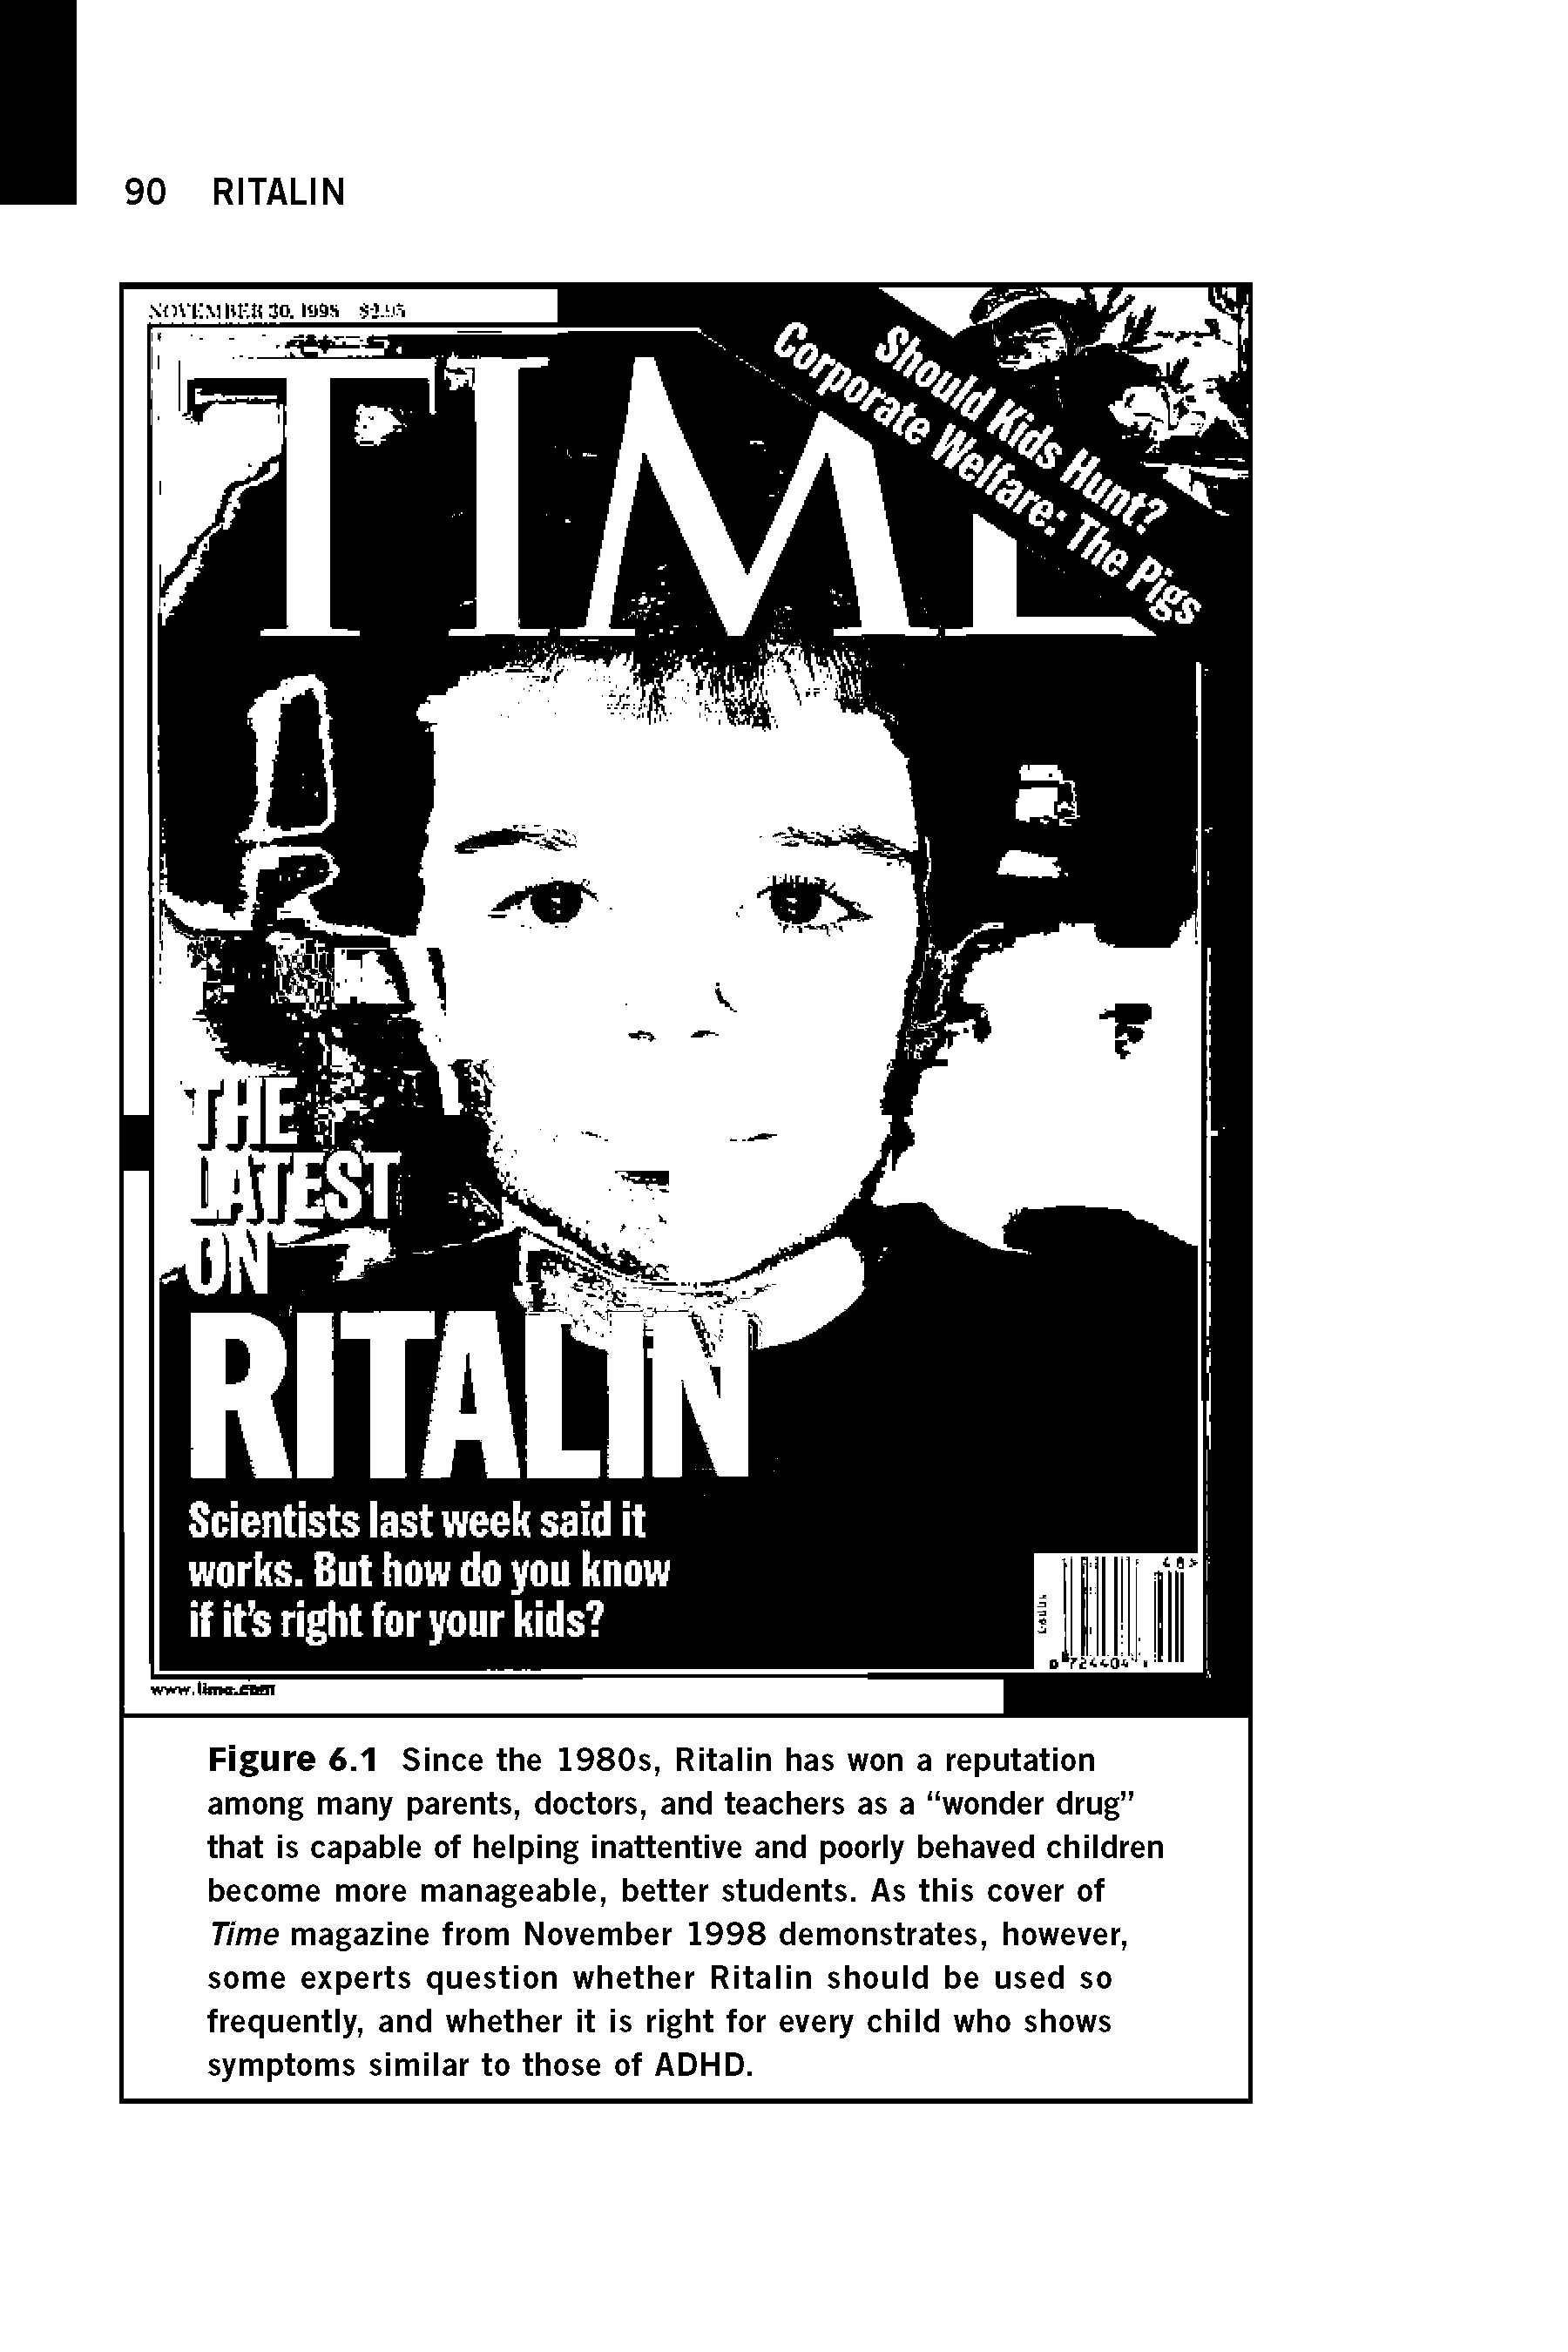 Figure 6.1 Since the 1980s, Ritalin has won a reputation among many parents, doctors, and teachers as a wonder drug that is capable of helping inattentive and poorly behaved children become more manageable, better students. As this cover of Time magazine from November 1998 demonstrates, however, some experts question whether Ritalin should be used so frequently, and whether it is right for every child who shows symptoms similar to those of ADHD.